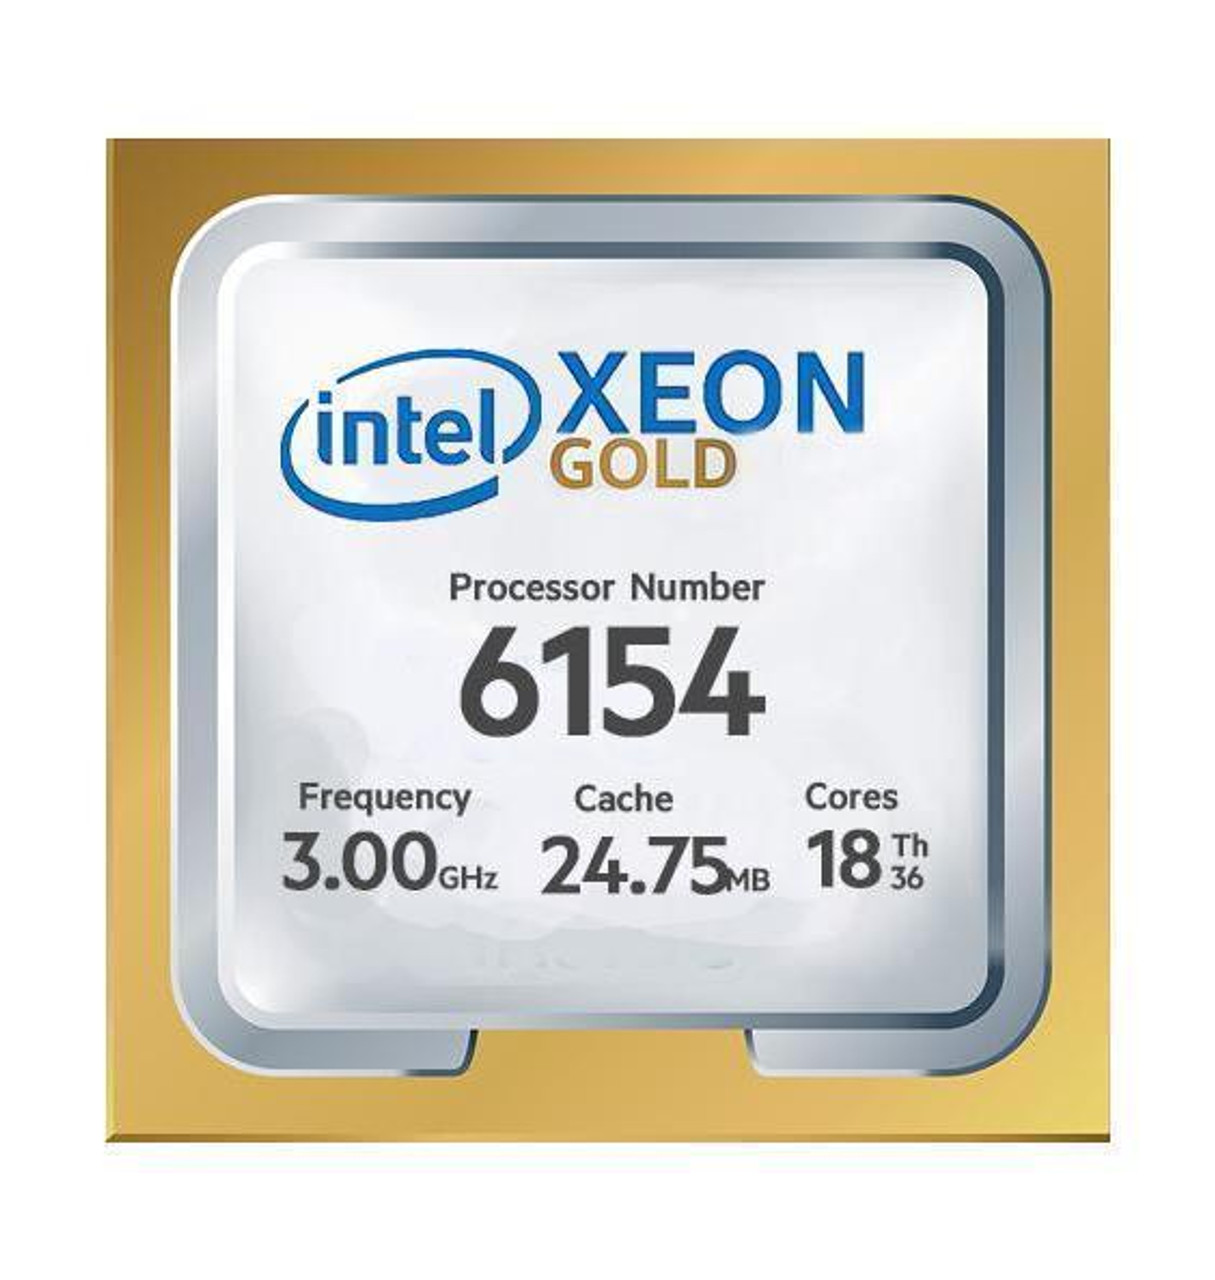 HP Intel Xeon Gold 6154 Octadeca-core 18-Core 3GHz Processor Upgrade 24.75MB L3 Cache 64-bit Processing 3.70GHz Overclocking Speed 14 nm Socket 3647